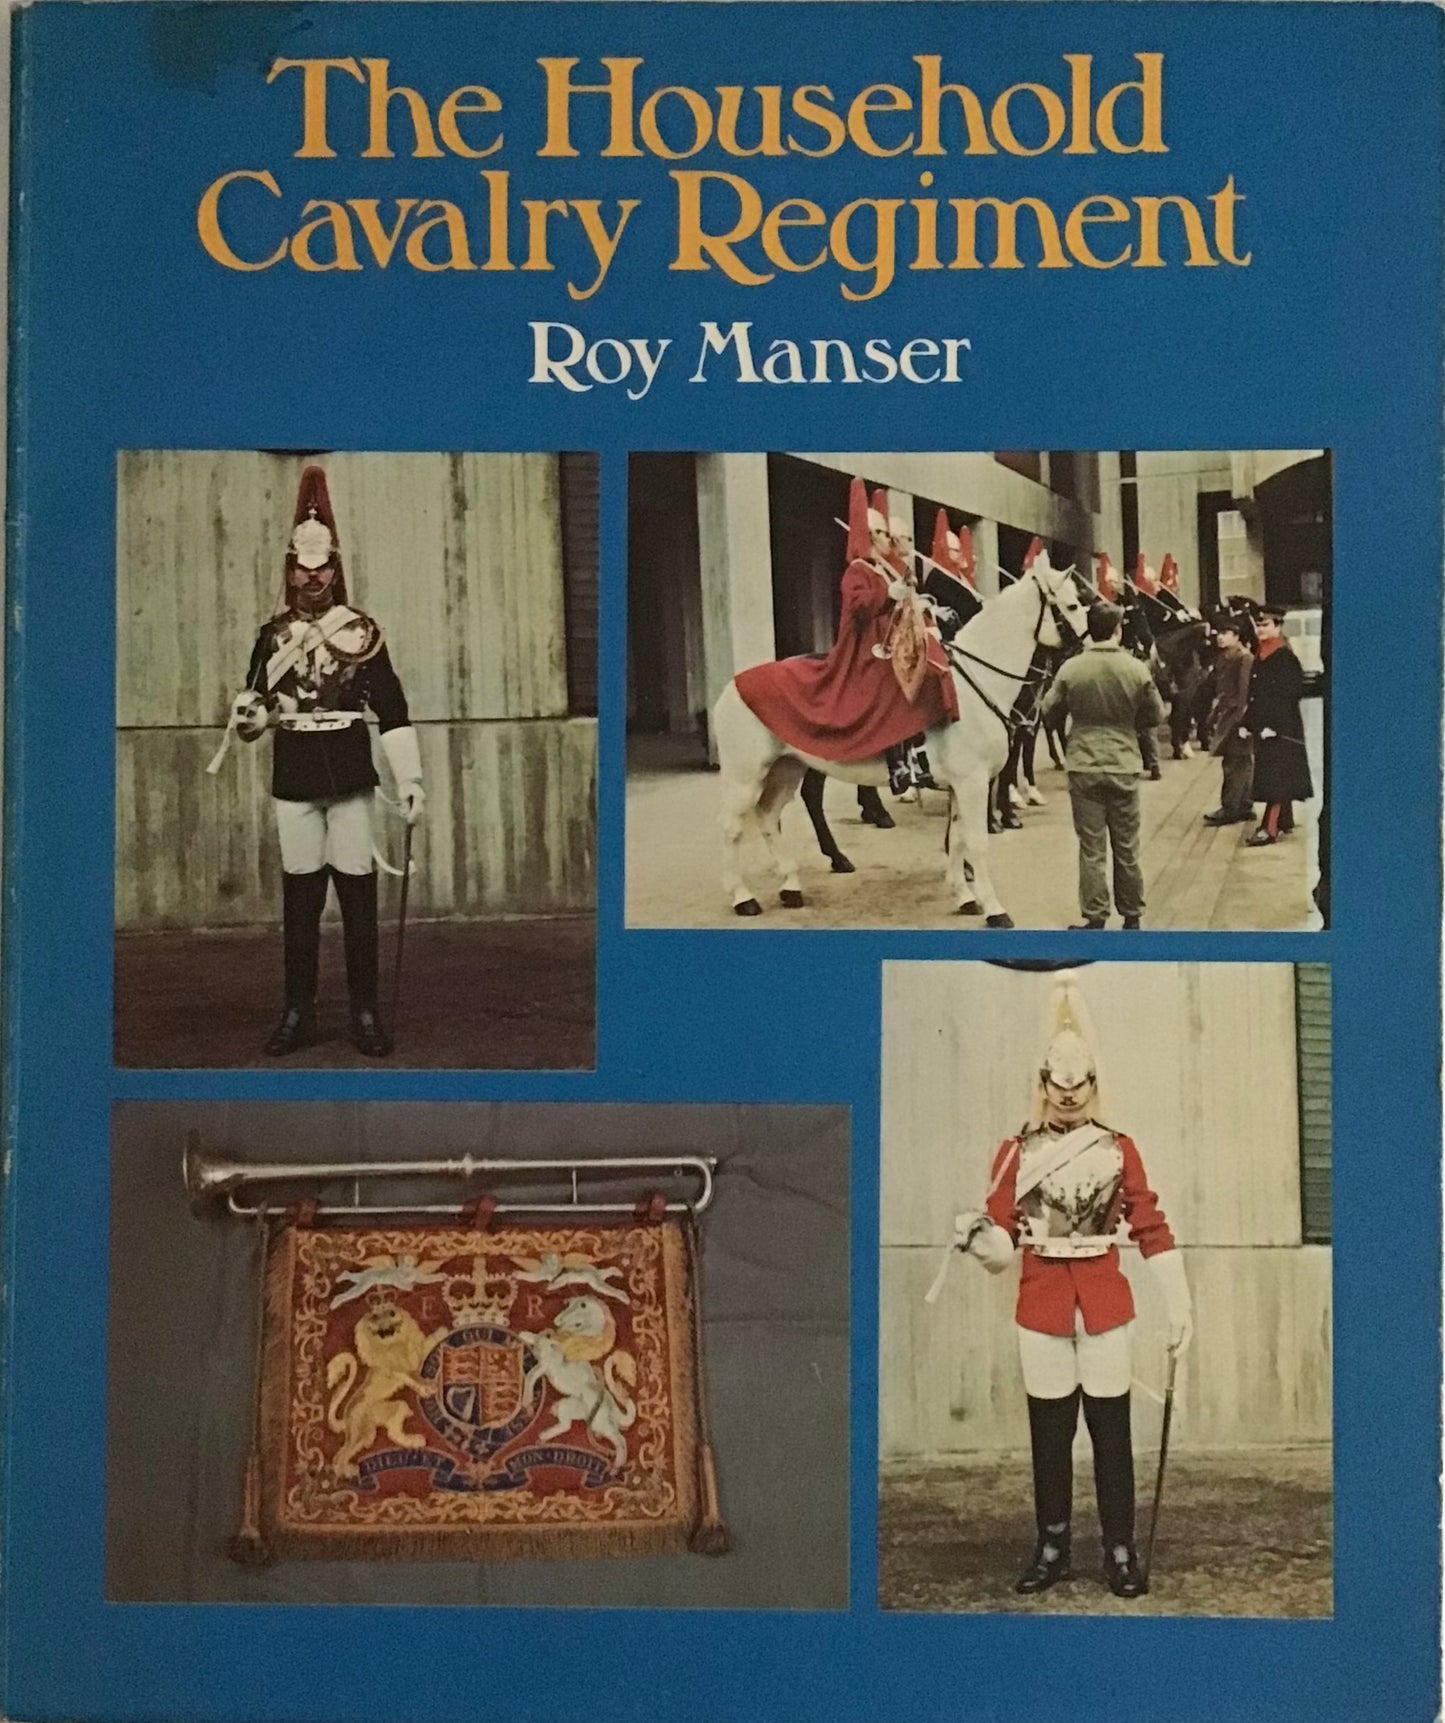 The Household Cavalry Regiment by Roy Manser - Chester Model Centre